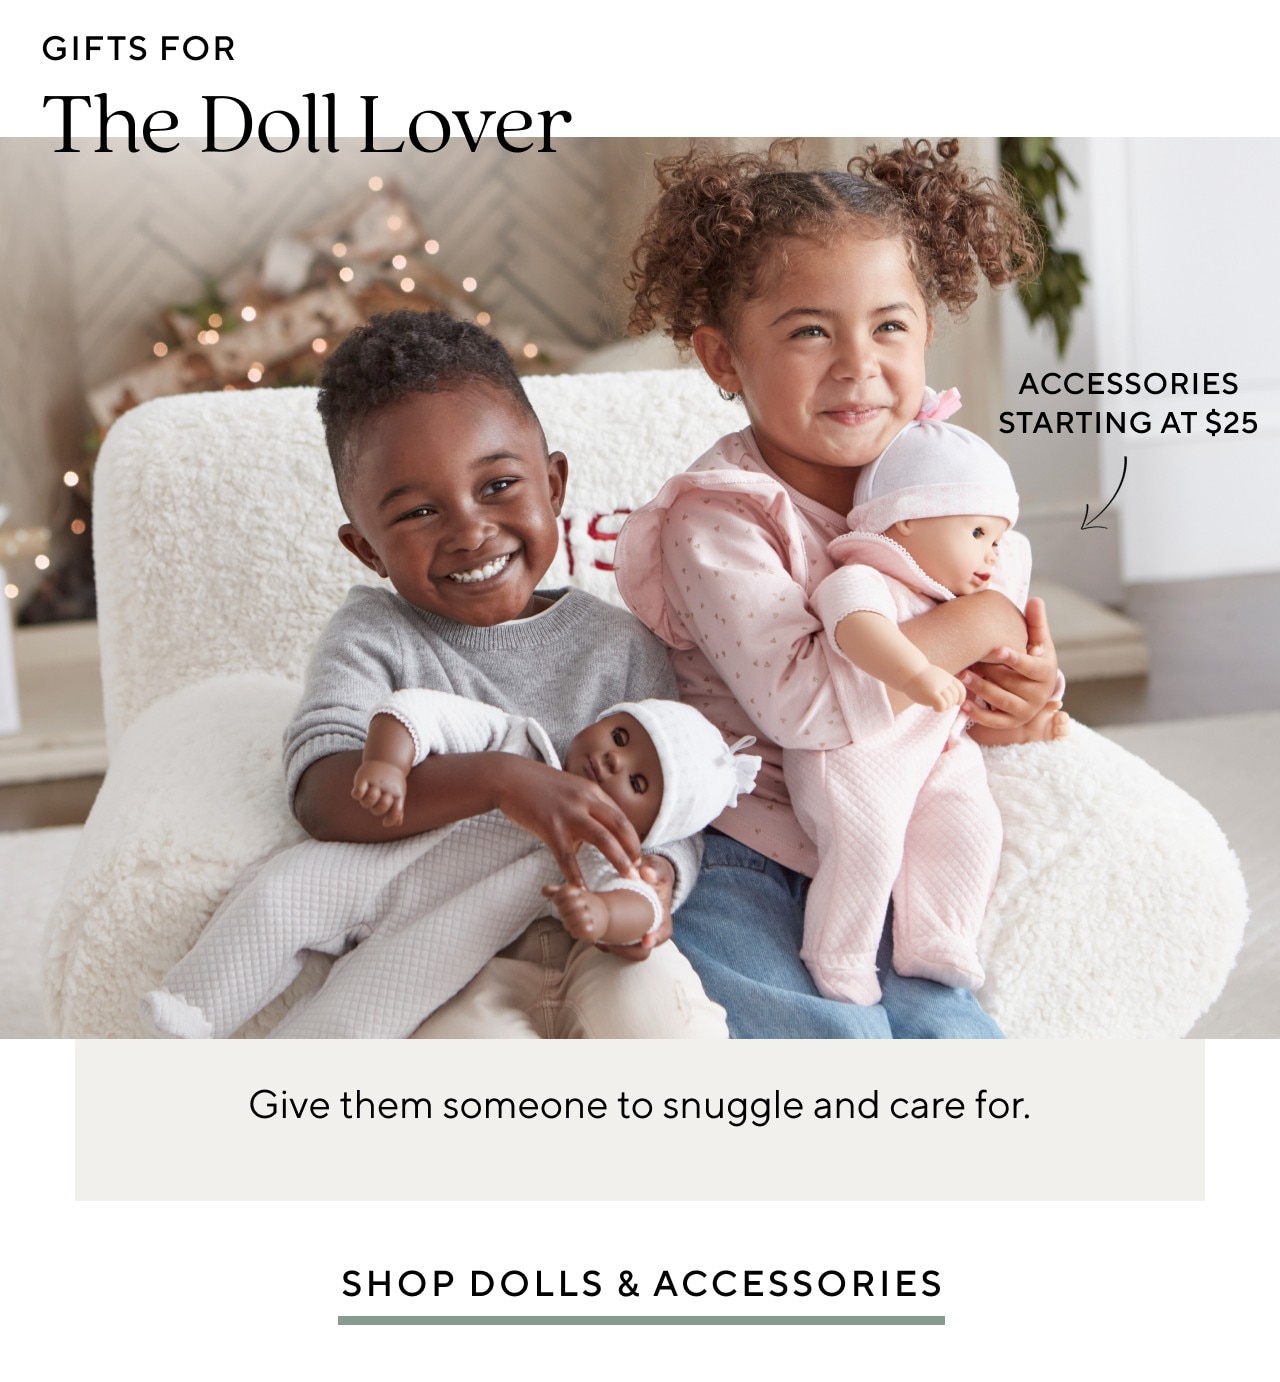 GIFTS FOR THE DOLL LOVER